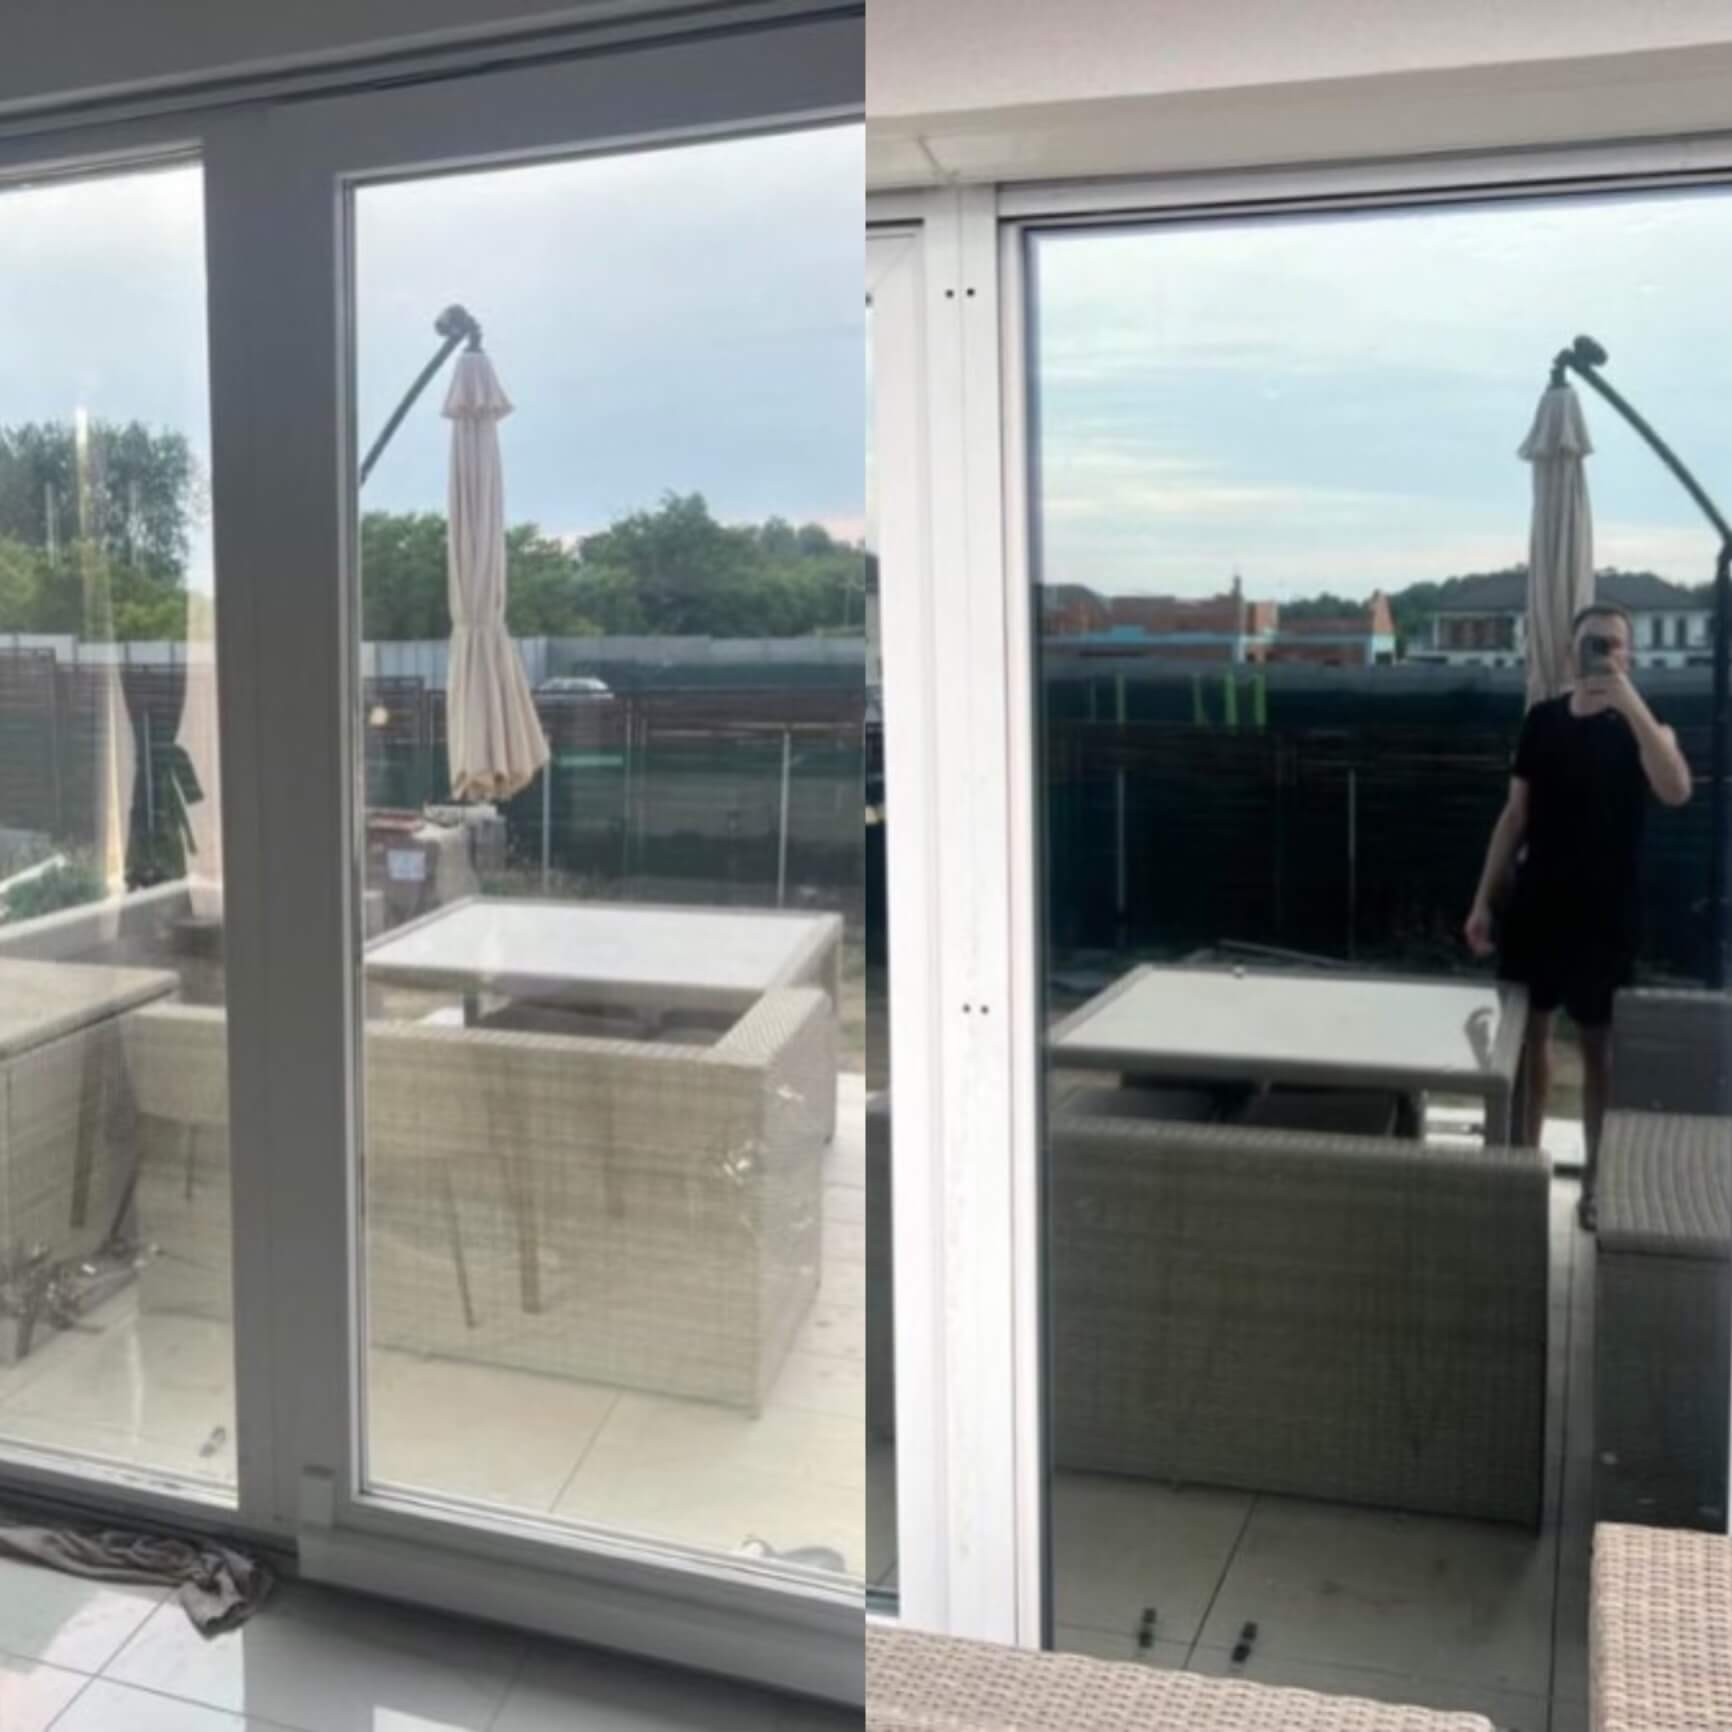 coverglass film 20% installed on window, before and after pictures